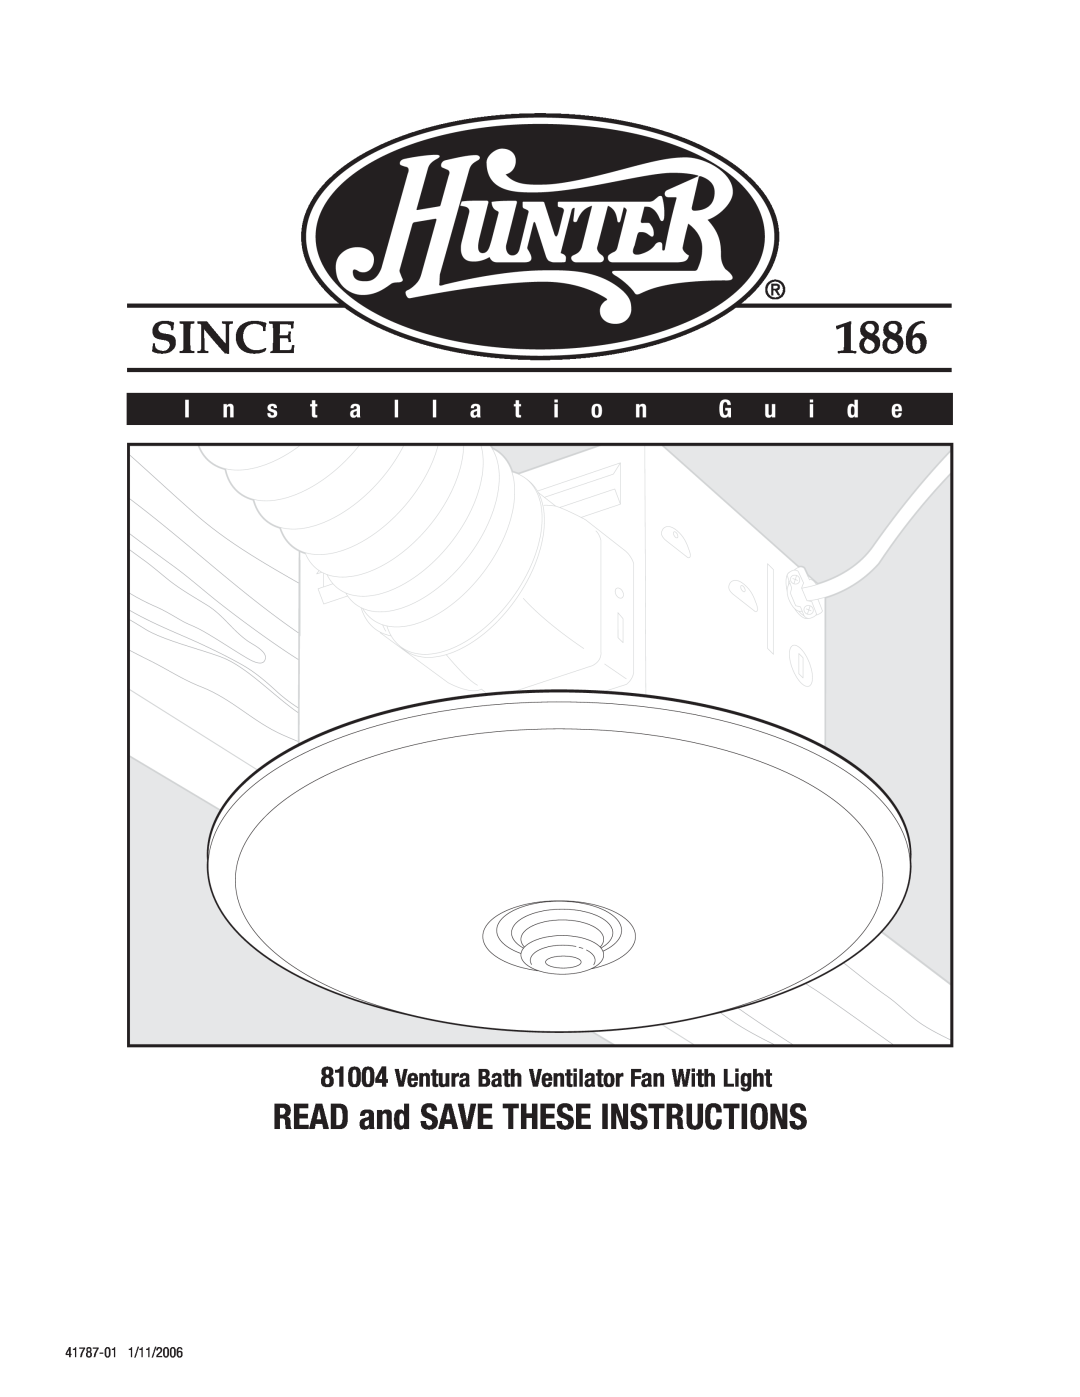 Hunter Fan 81004 manual READ and SAVE THESE INSTRUCTIONS, I n s t a l l a t i o n, G u i d e 